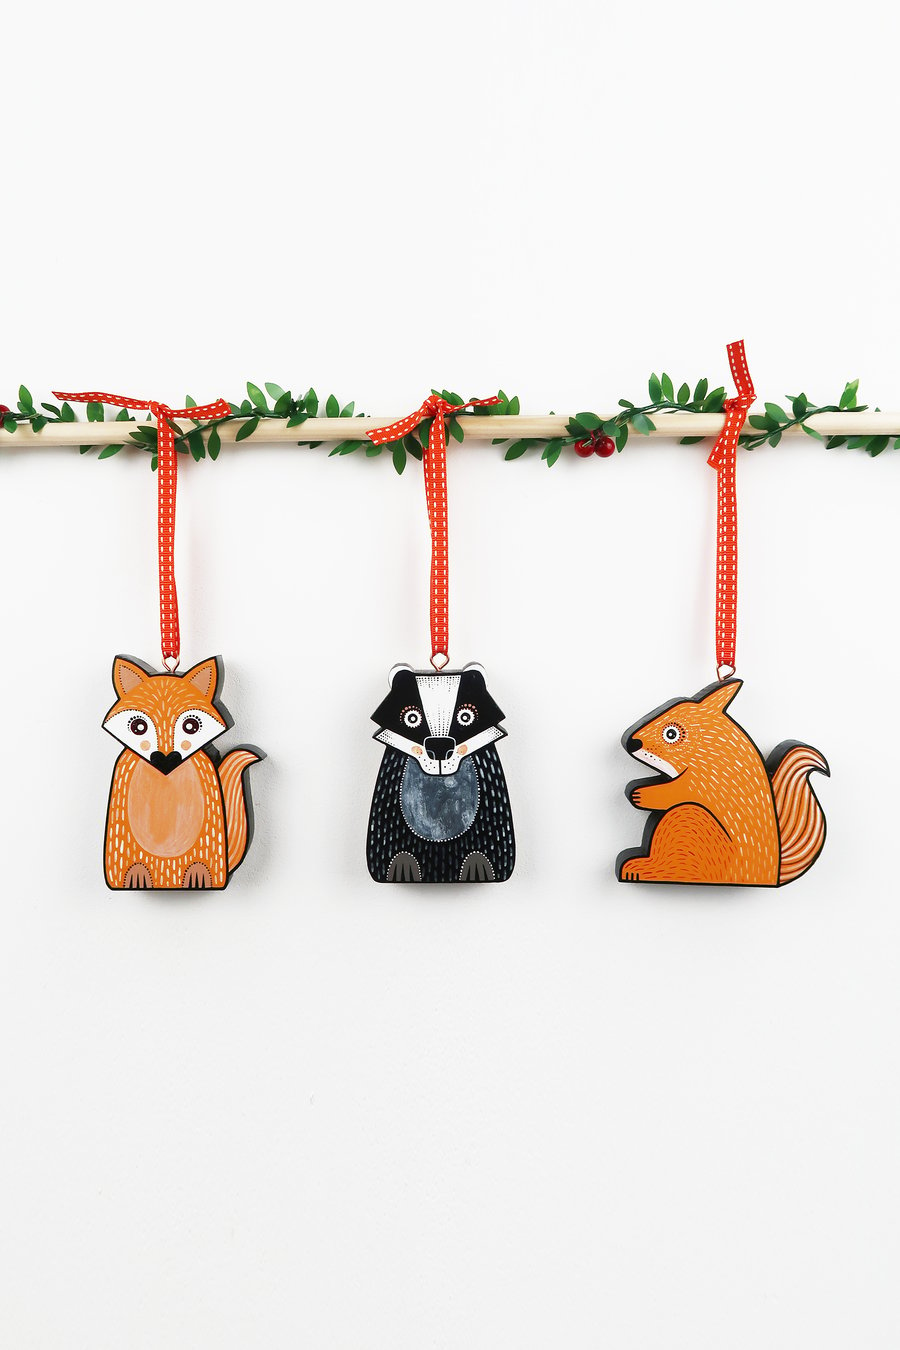 Fox, badger and red squirrel hanging ornaments, woodland theme home decor.